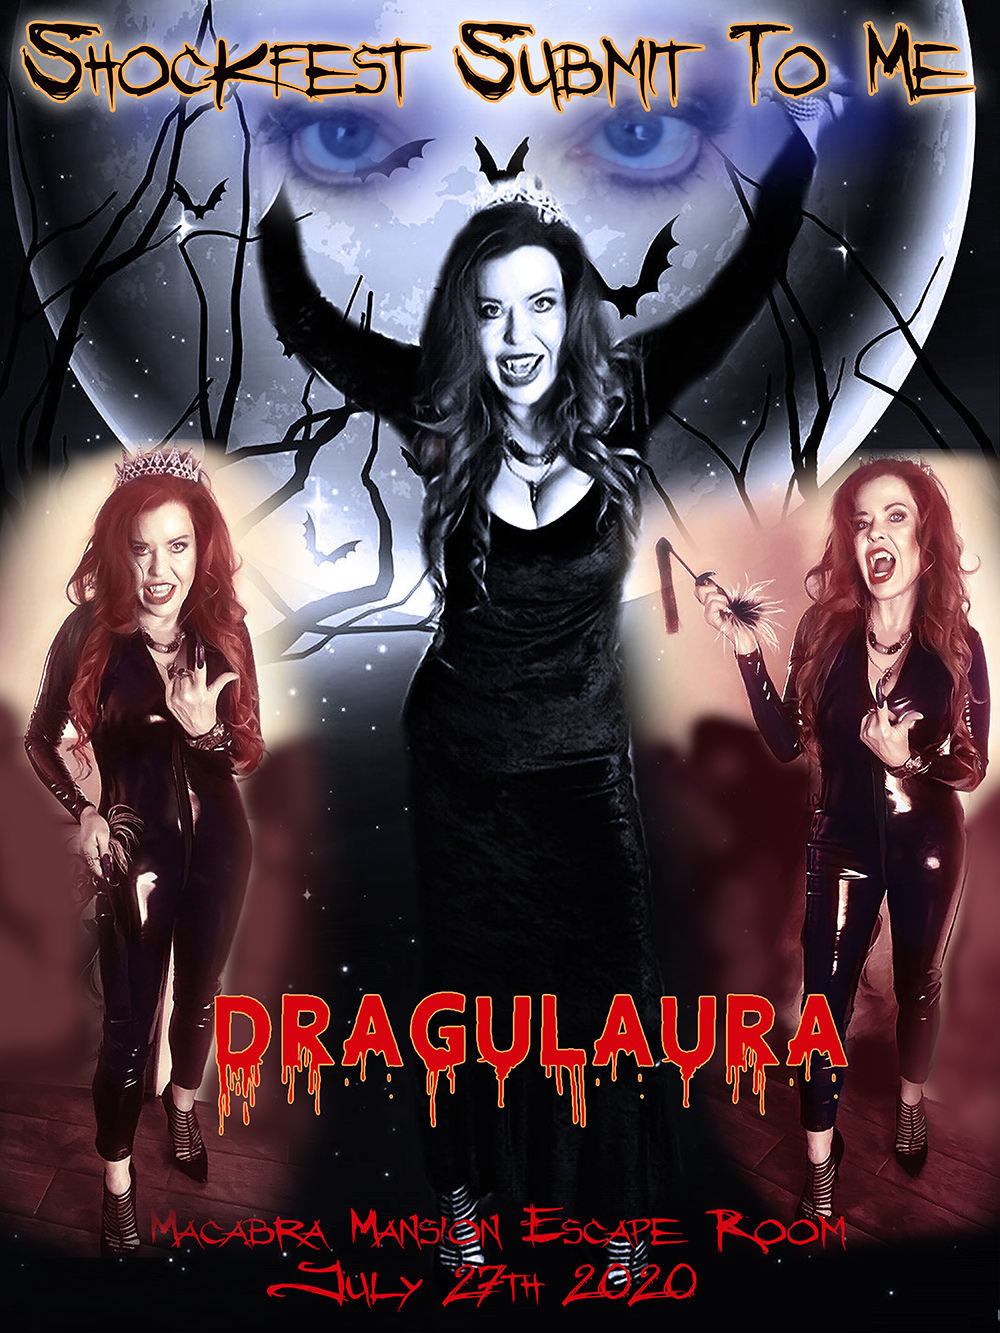 Shockfest Submit to Me with Dragulaura Queen of the Vampires